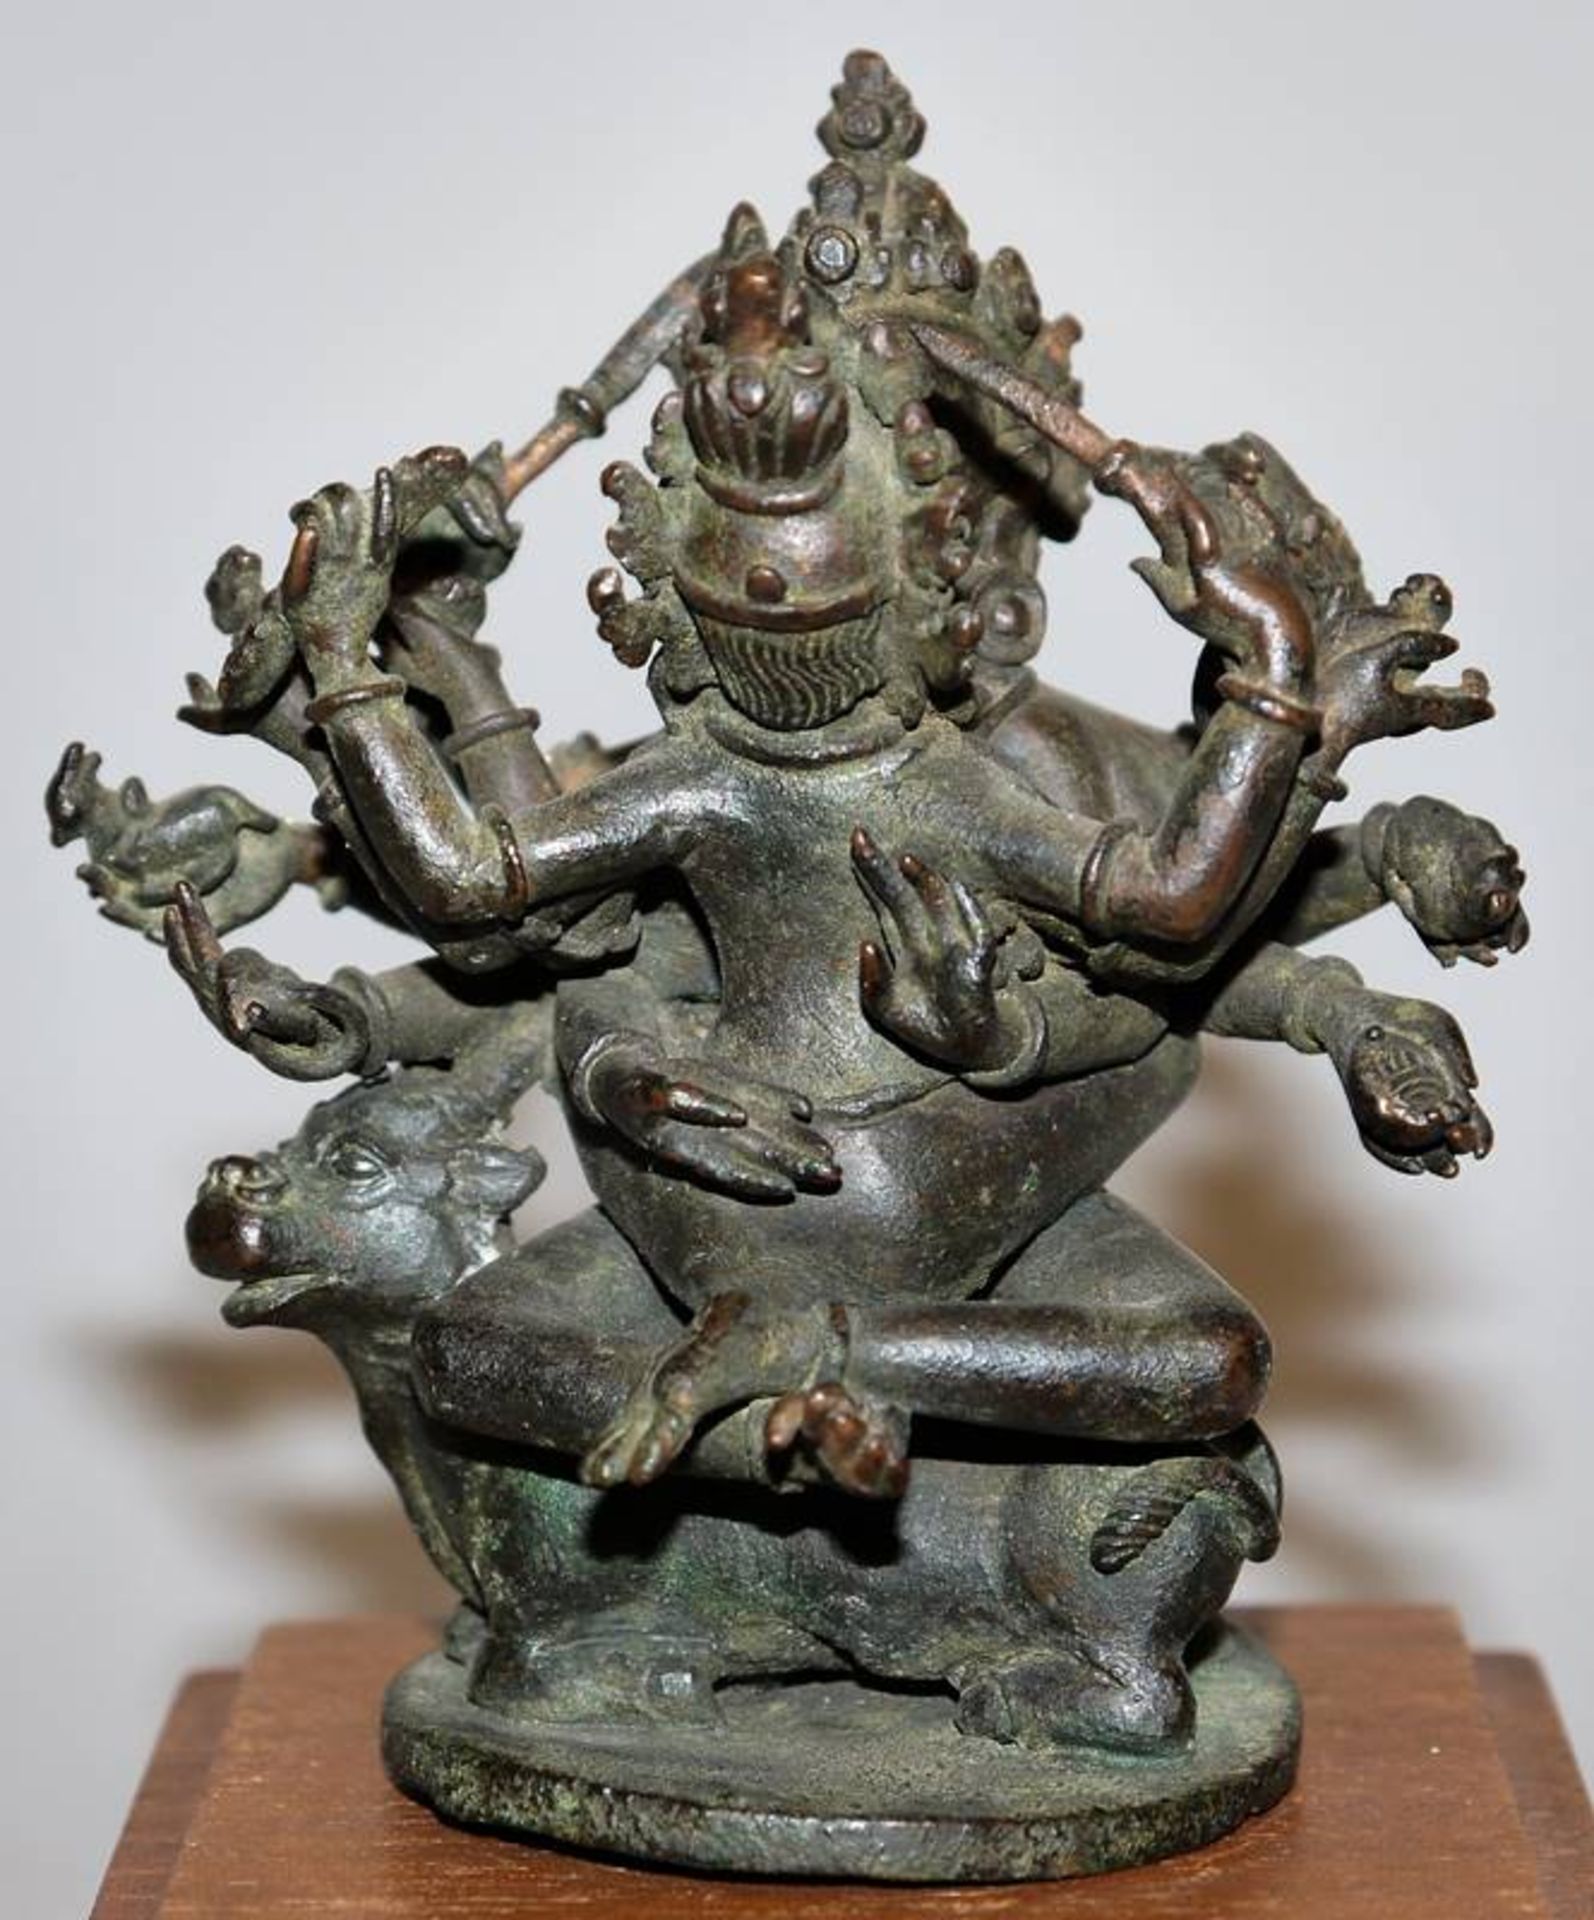 The god Shiva with consort in sexual union, bronze sculpture, Nepal 18th c. - Image 3 of 4